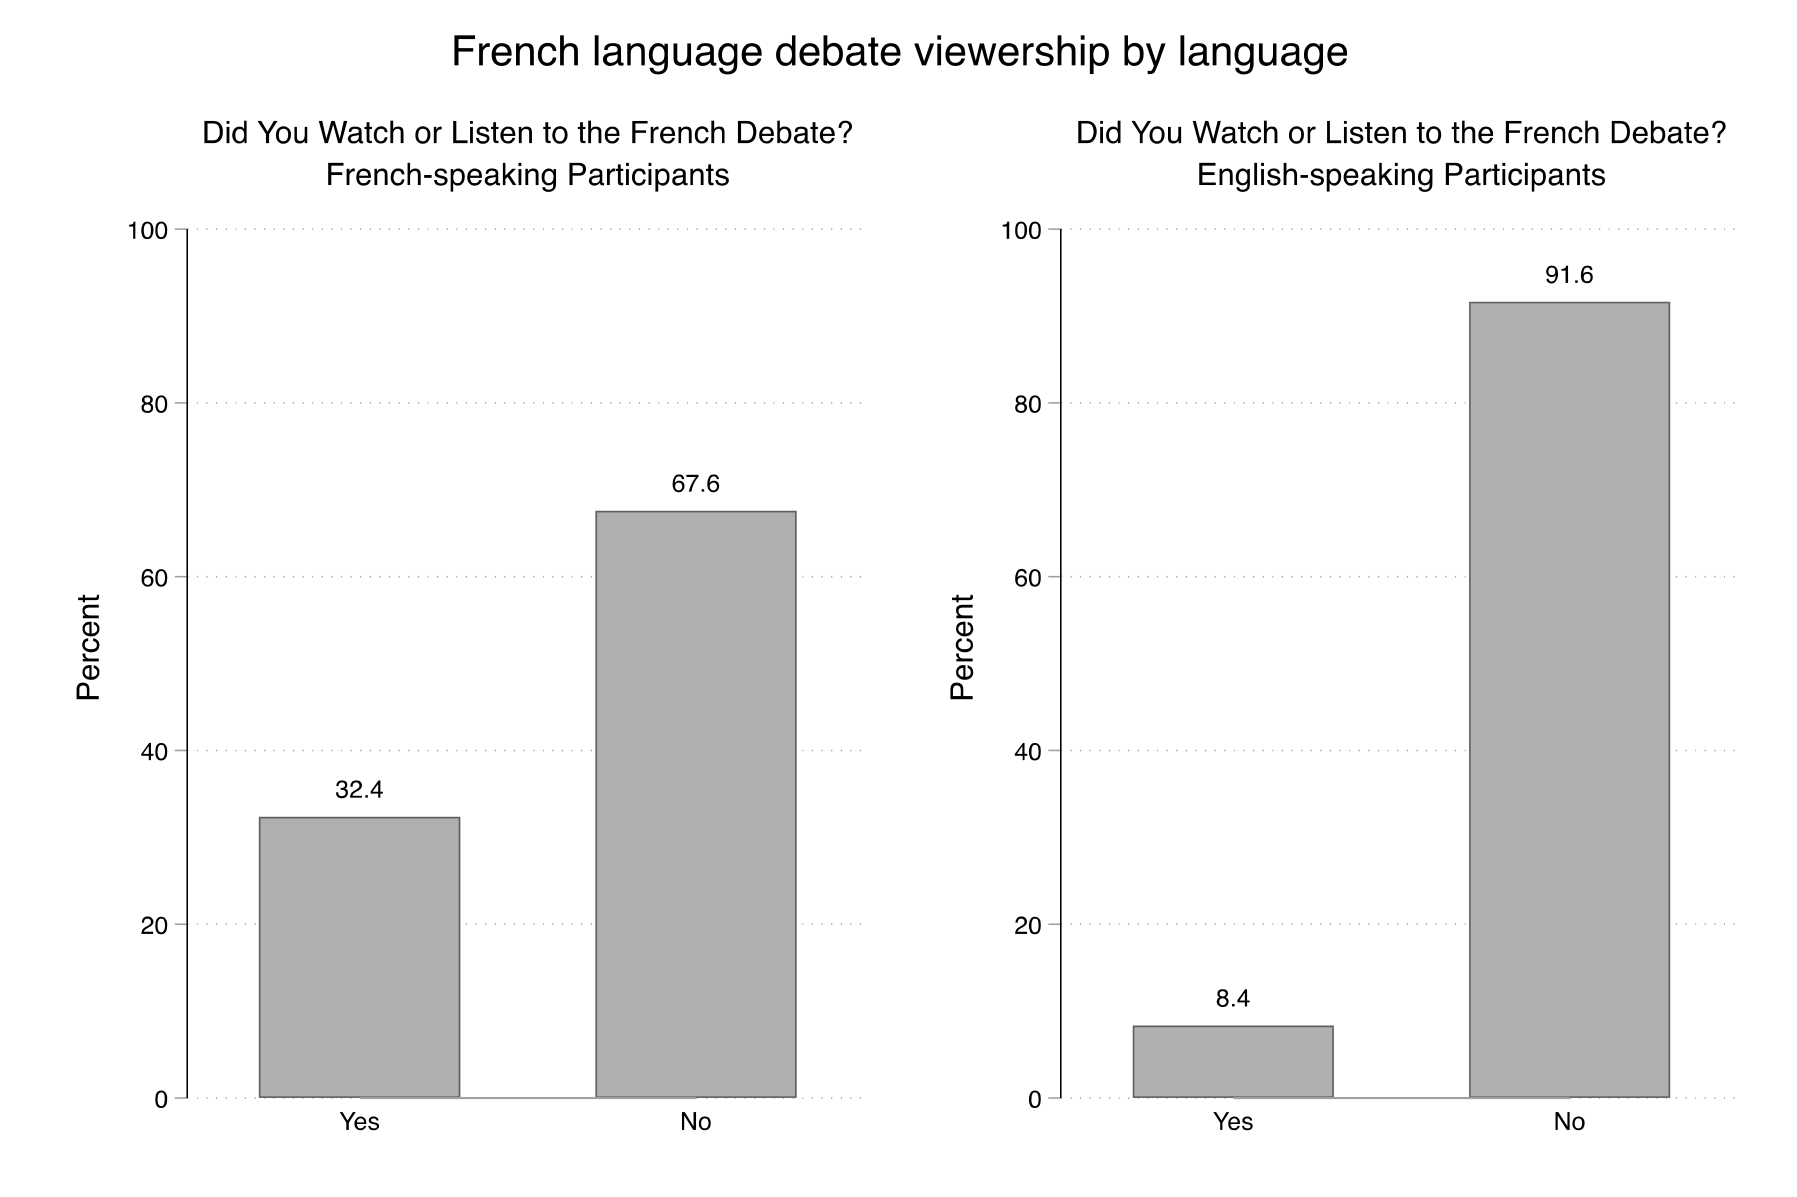 Figure 6. This figure shows the viewership of the French debate by participant language. It shows that 32% of French speakers, and 8% of English speakers, watched the French debate.